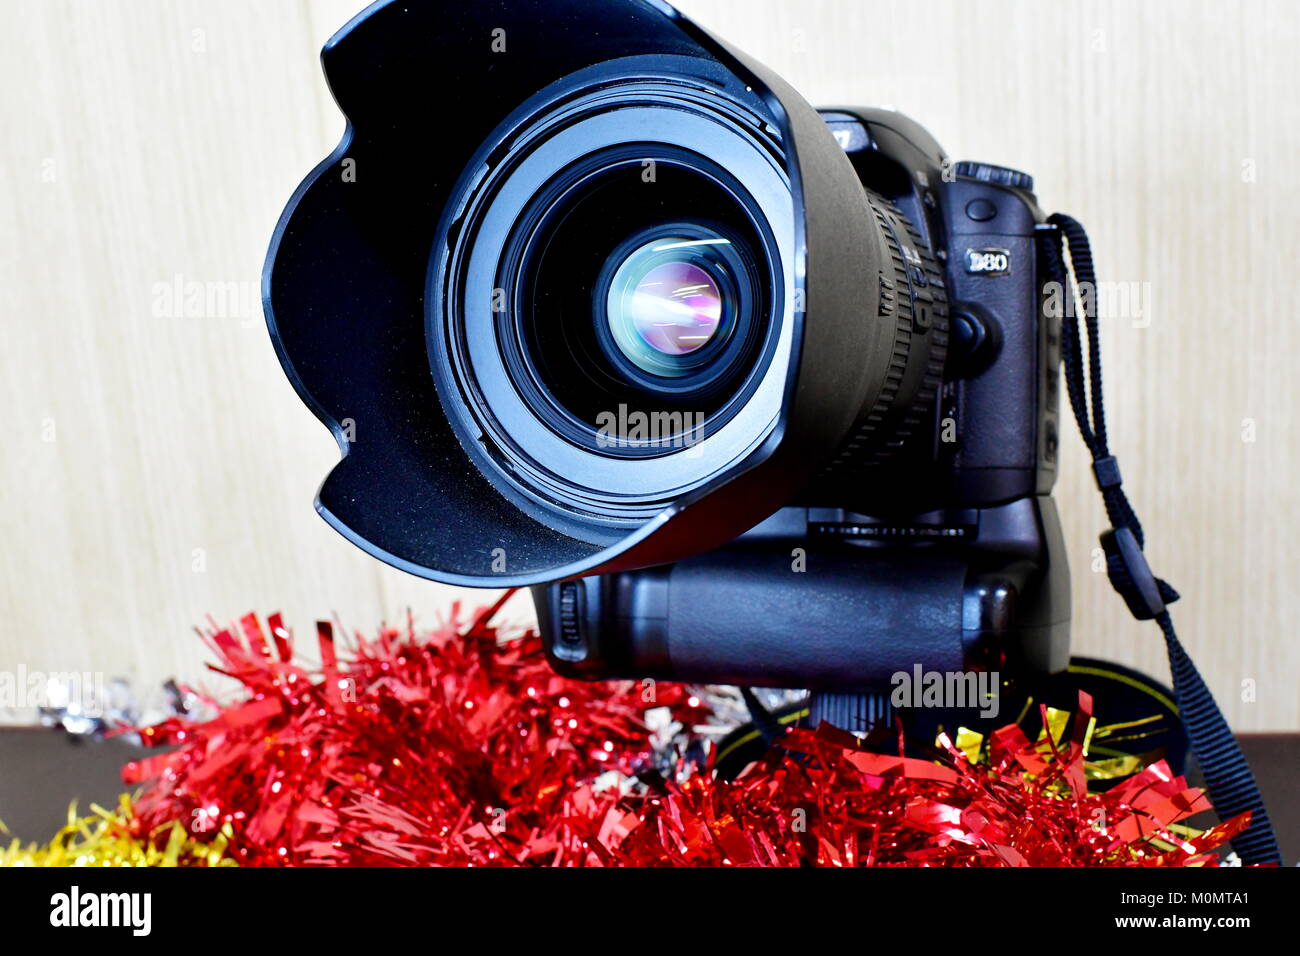 Nikon DSLR D80 and battery pack and Lenses on display and Christmas decorations as well Stock Photo